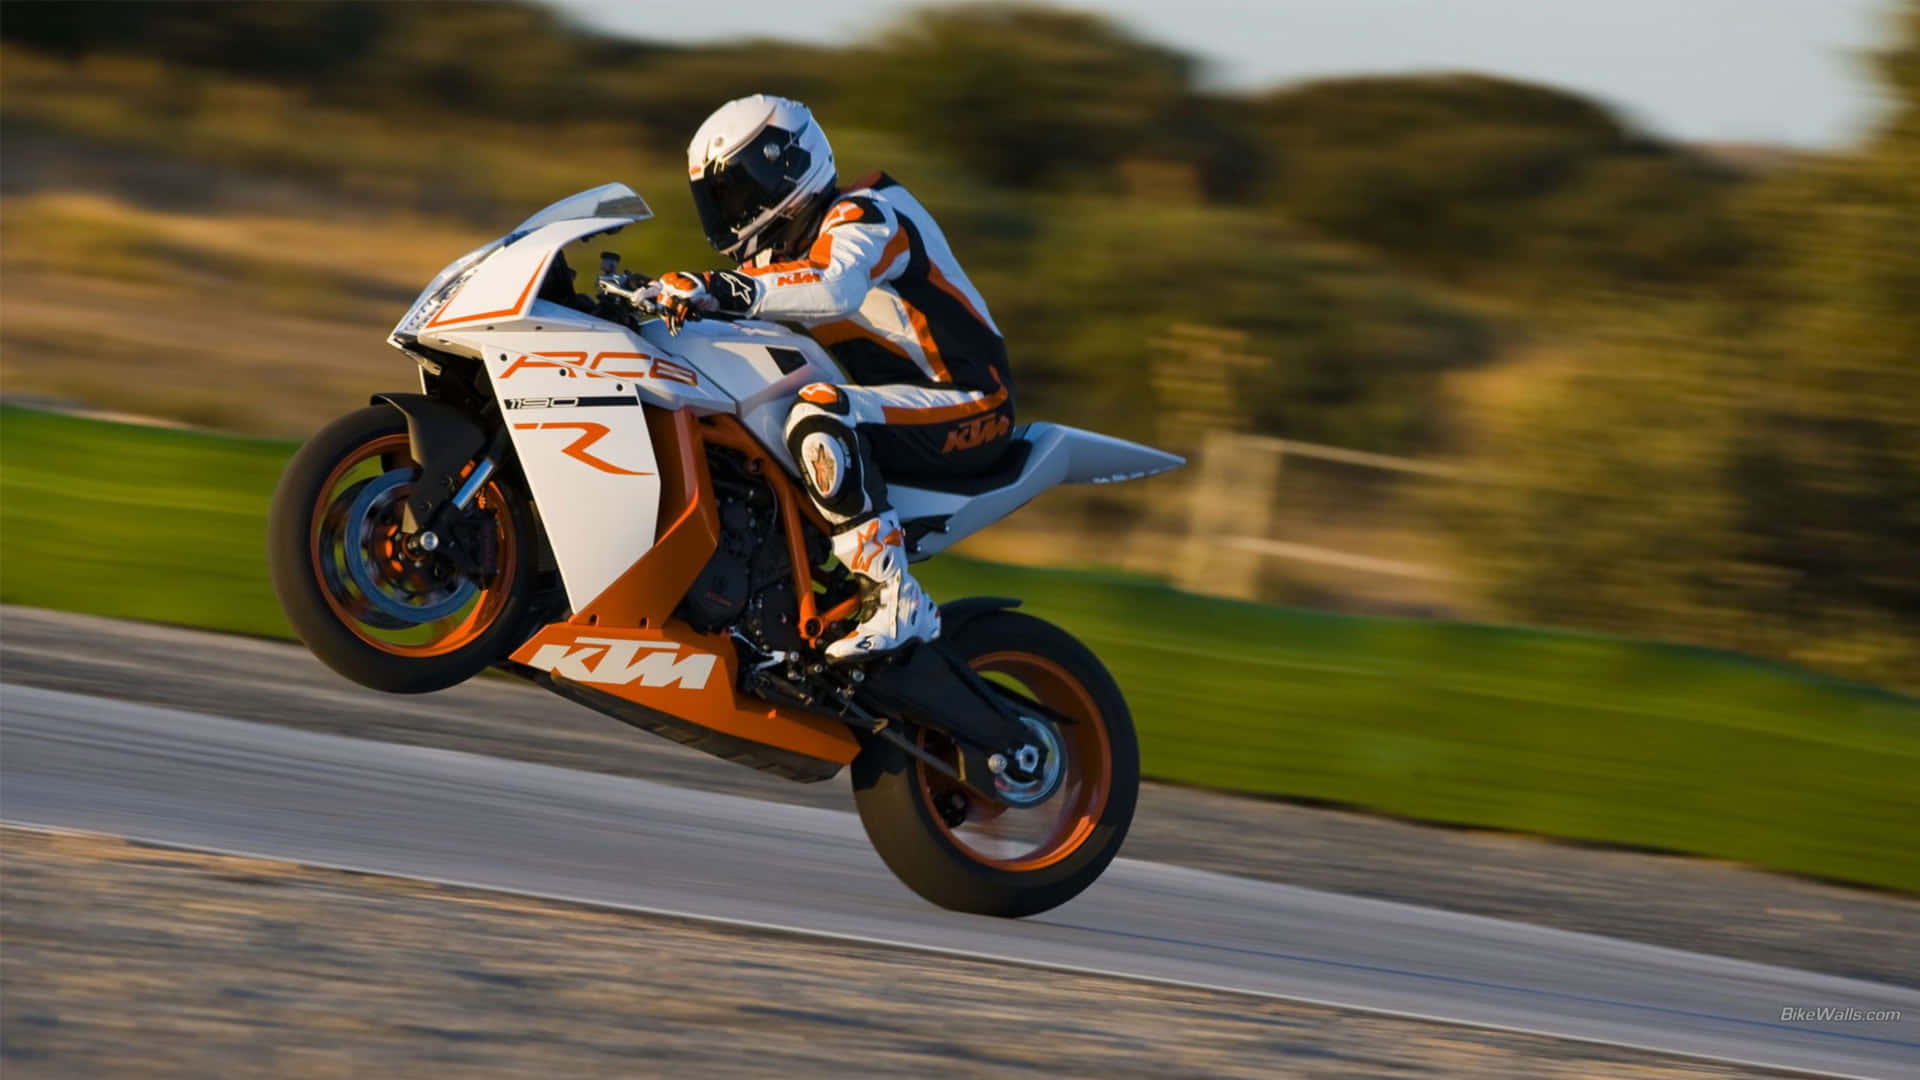 KTM Bike with Tight Curves Ahead